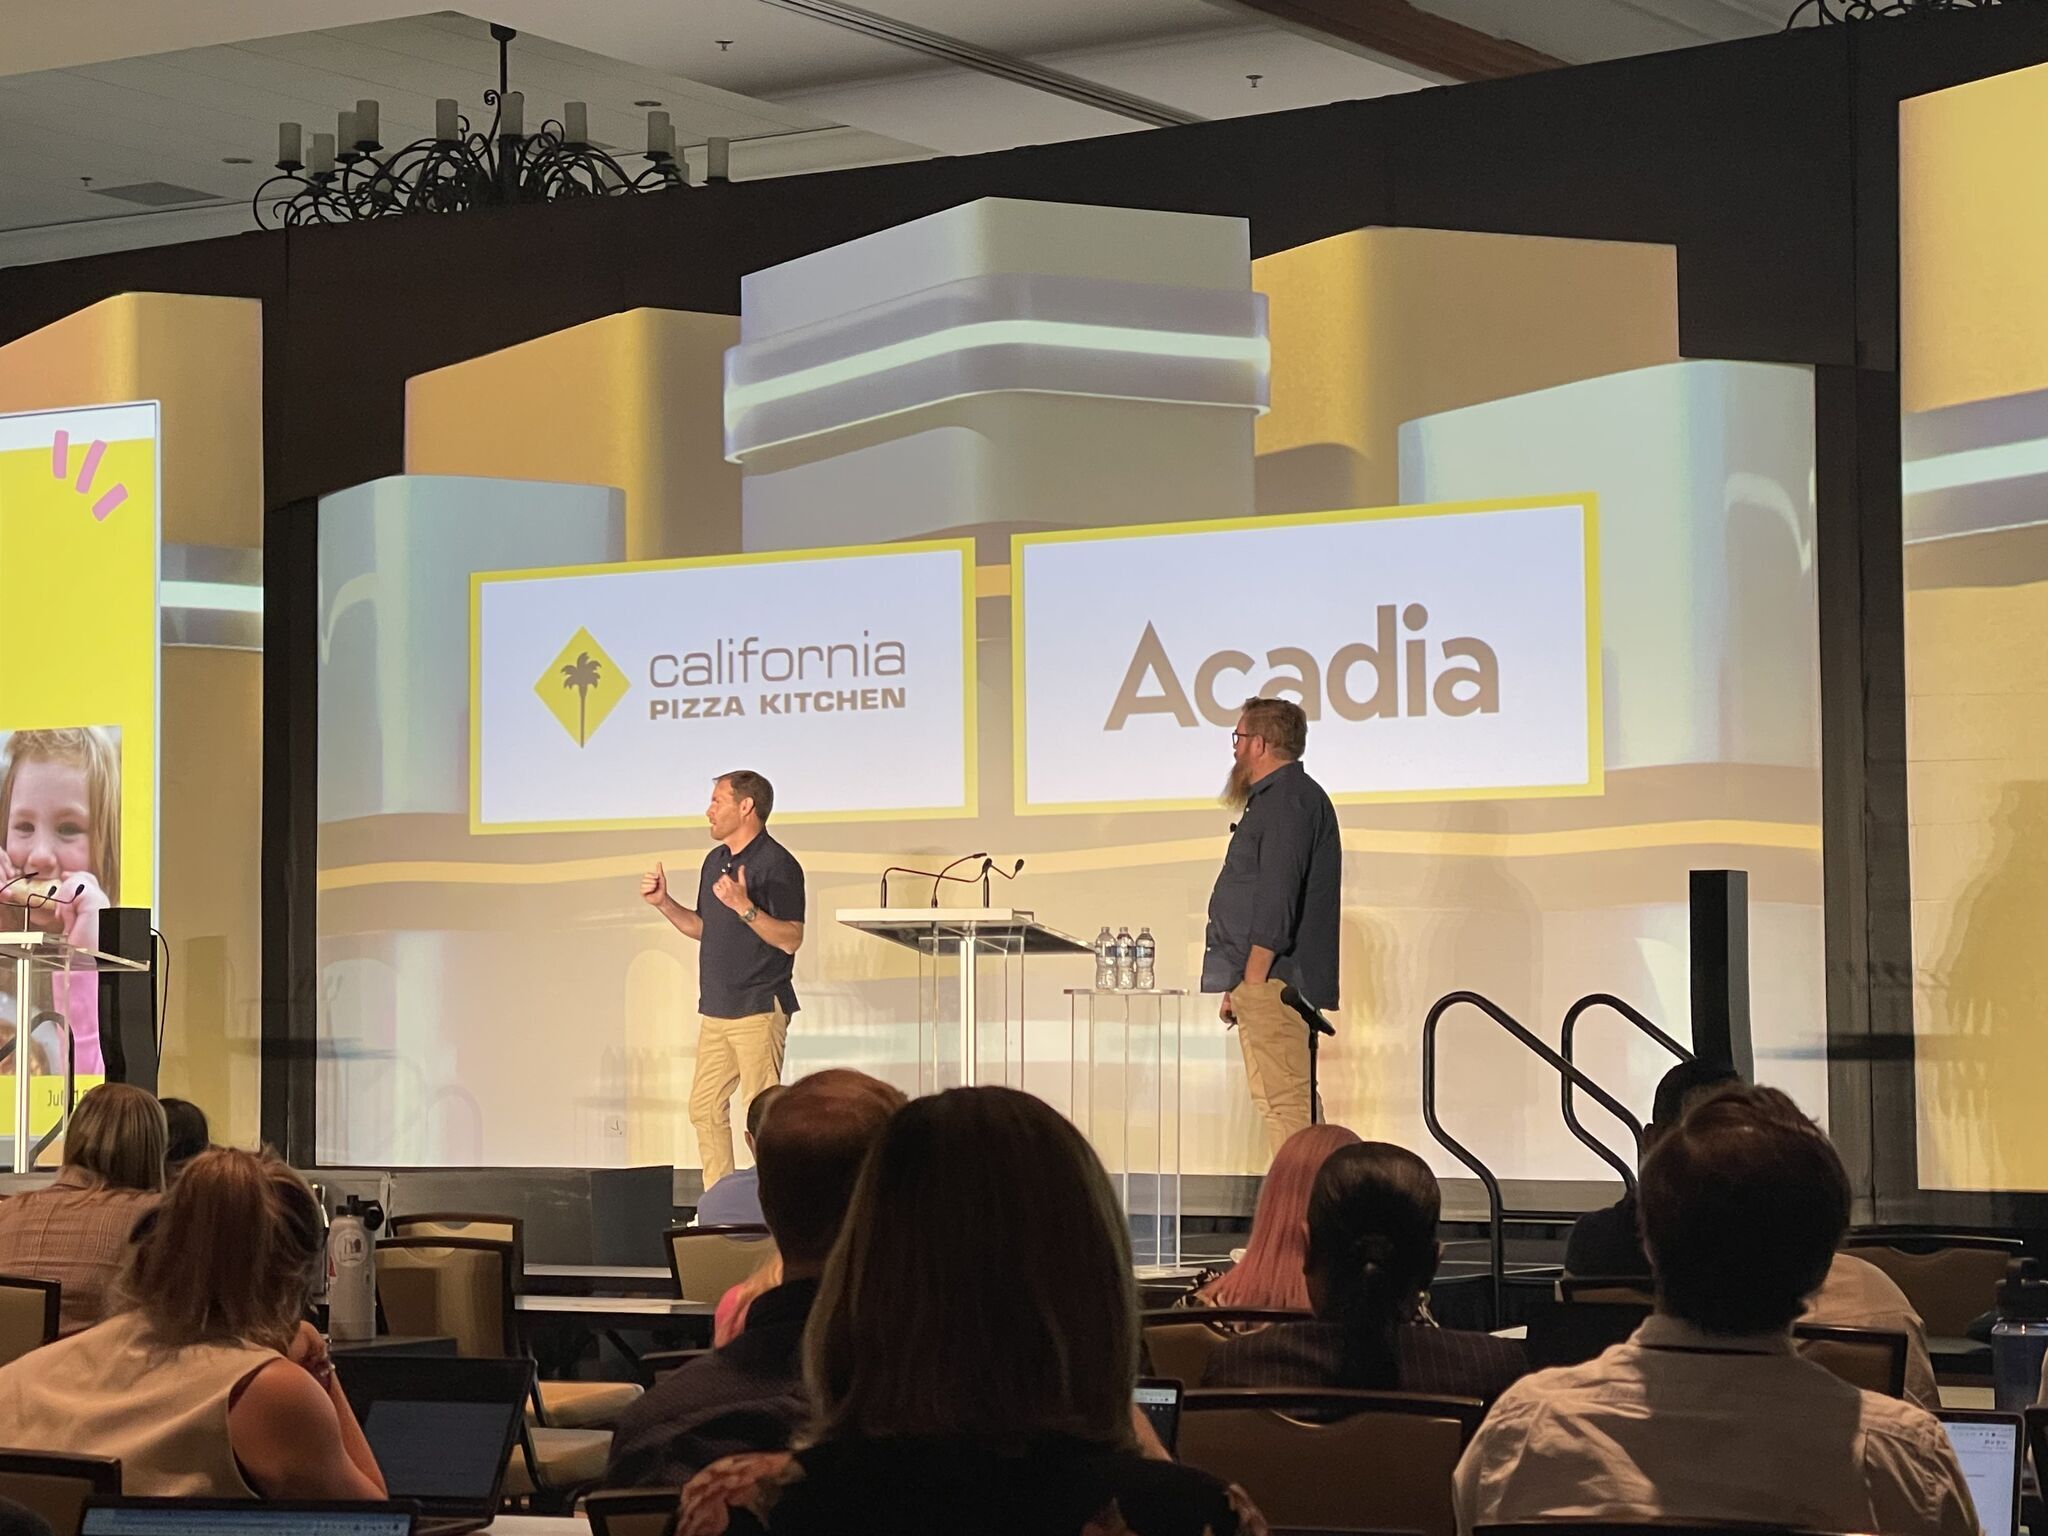 Scott Hargrove and Chad Crowe speaking at the ANA Digital and Social Media conference. Image Credit: Chad Musselman